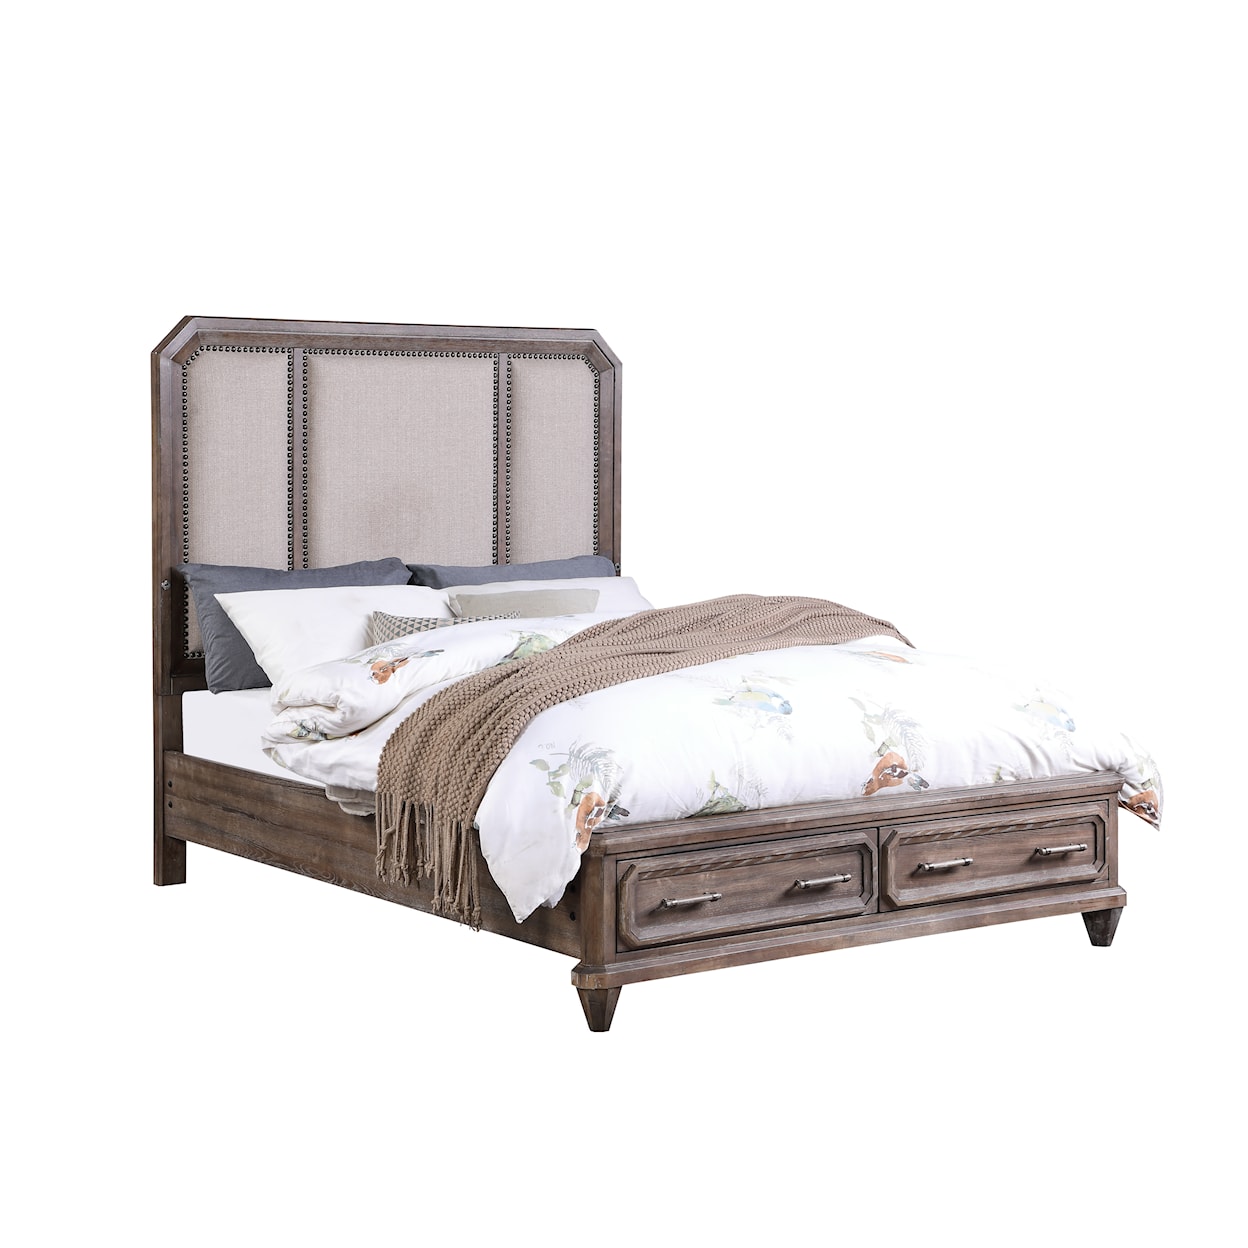 New Classic Lincoln Park California King Storage Bed 